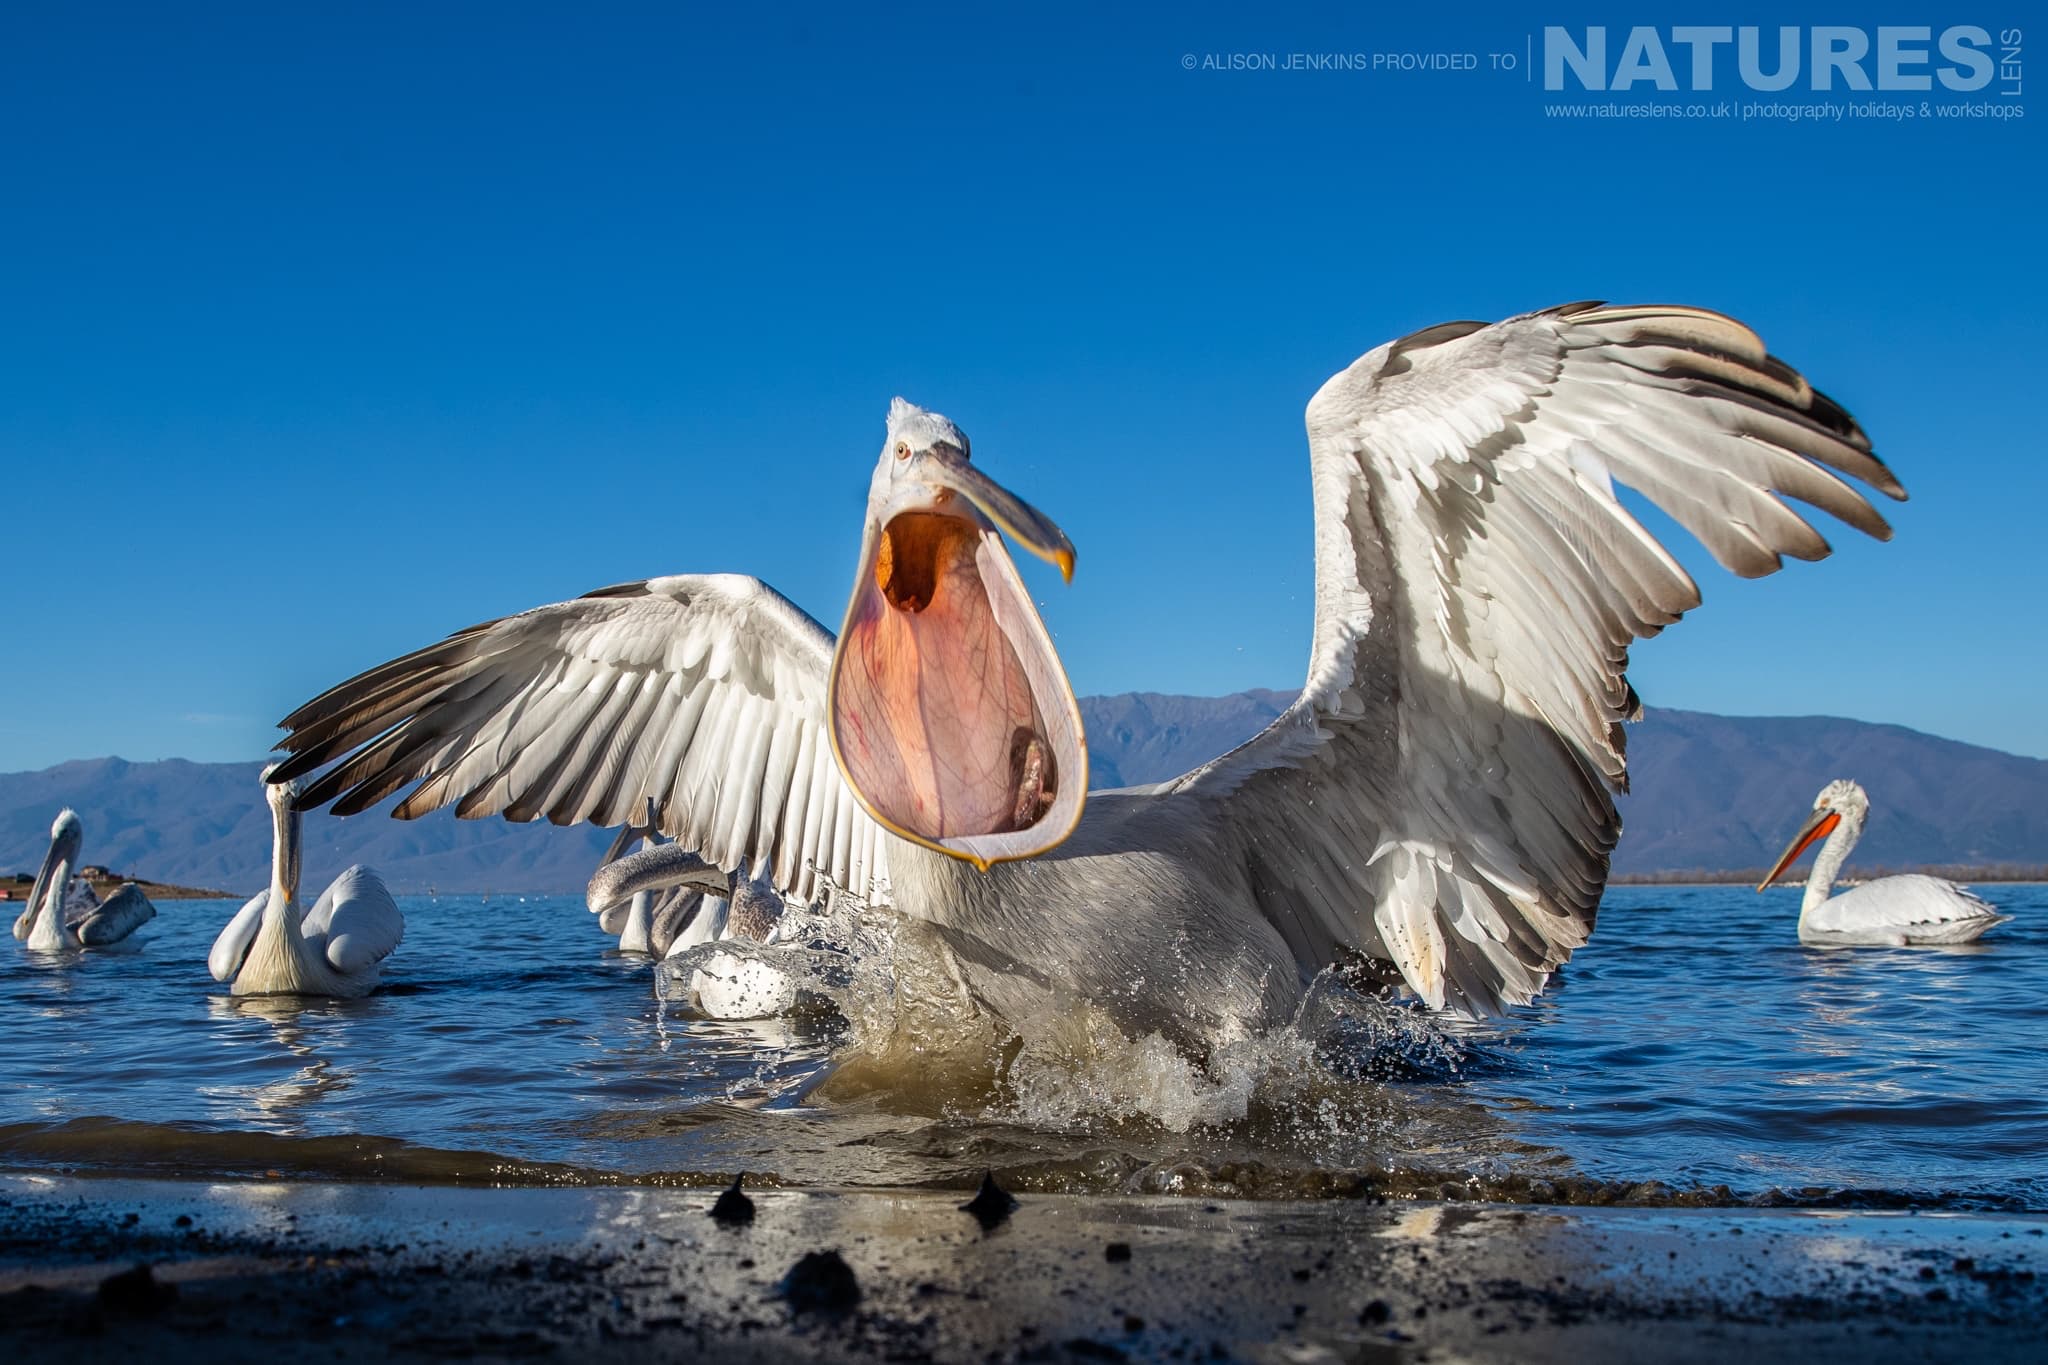 A Photograph From Alison Jenkins Which Demonstrates The Magic Of Dalmatian Pelican Photography